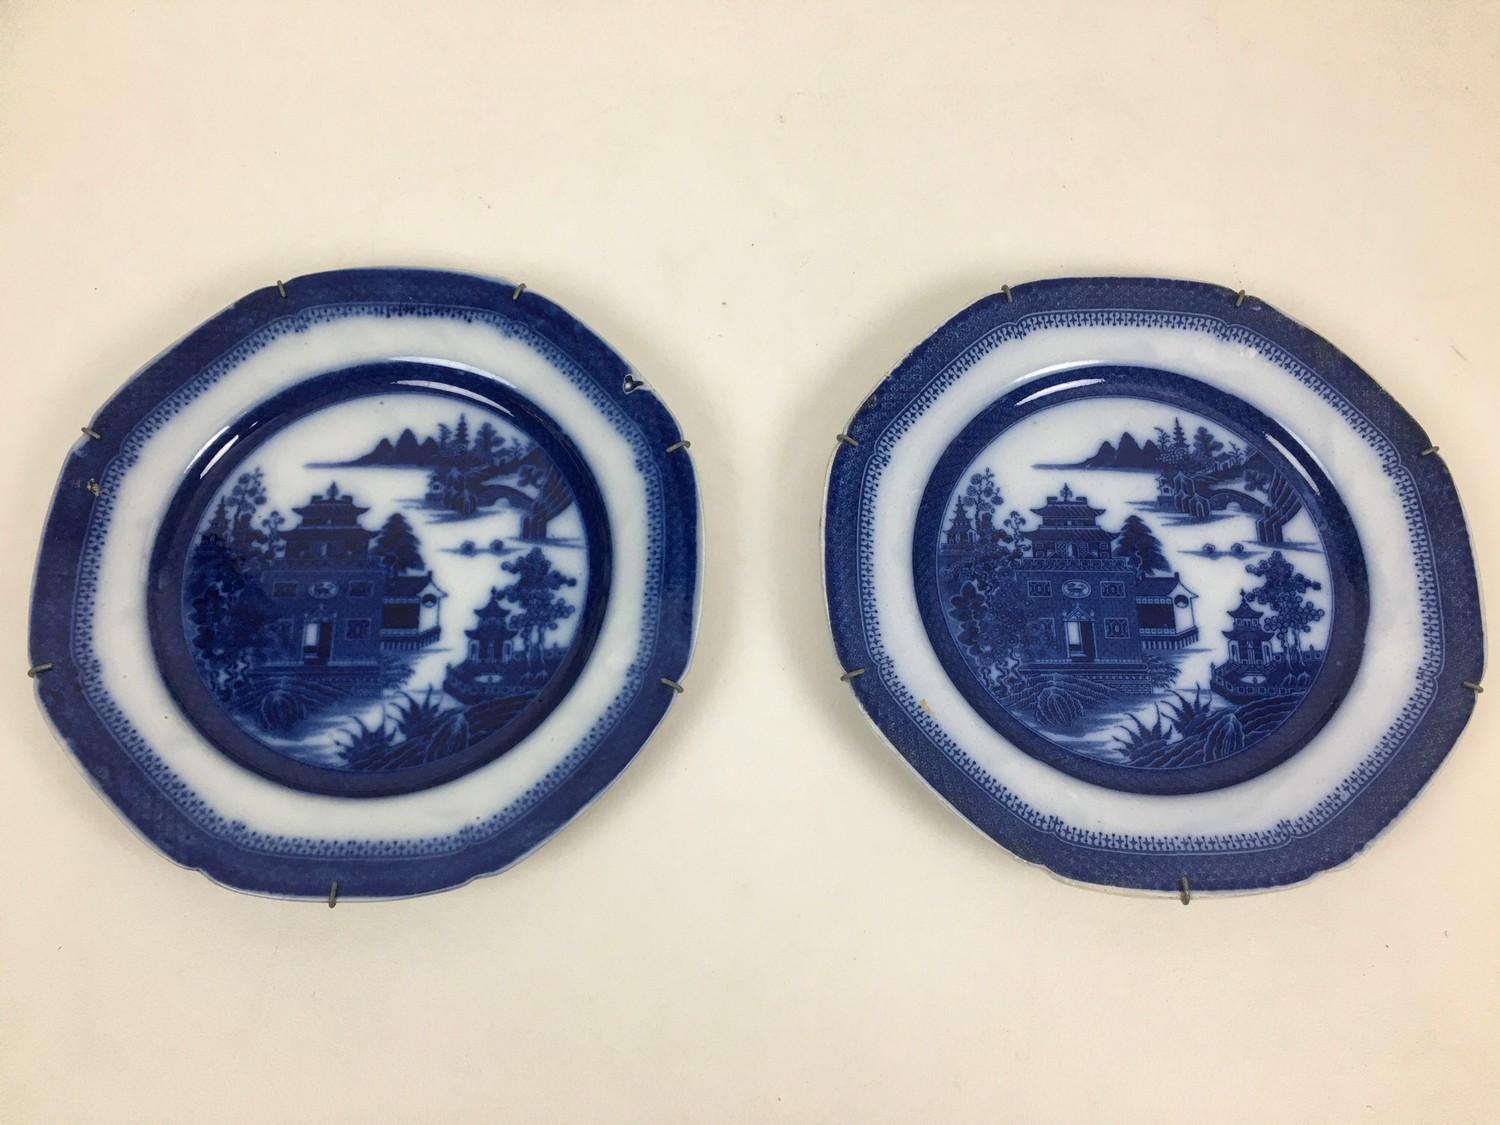 A Chinese Export porcelain blue and white plate, late 19th century, decorated with temples in - Image 6 of 7